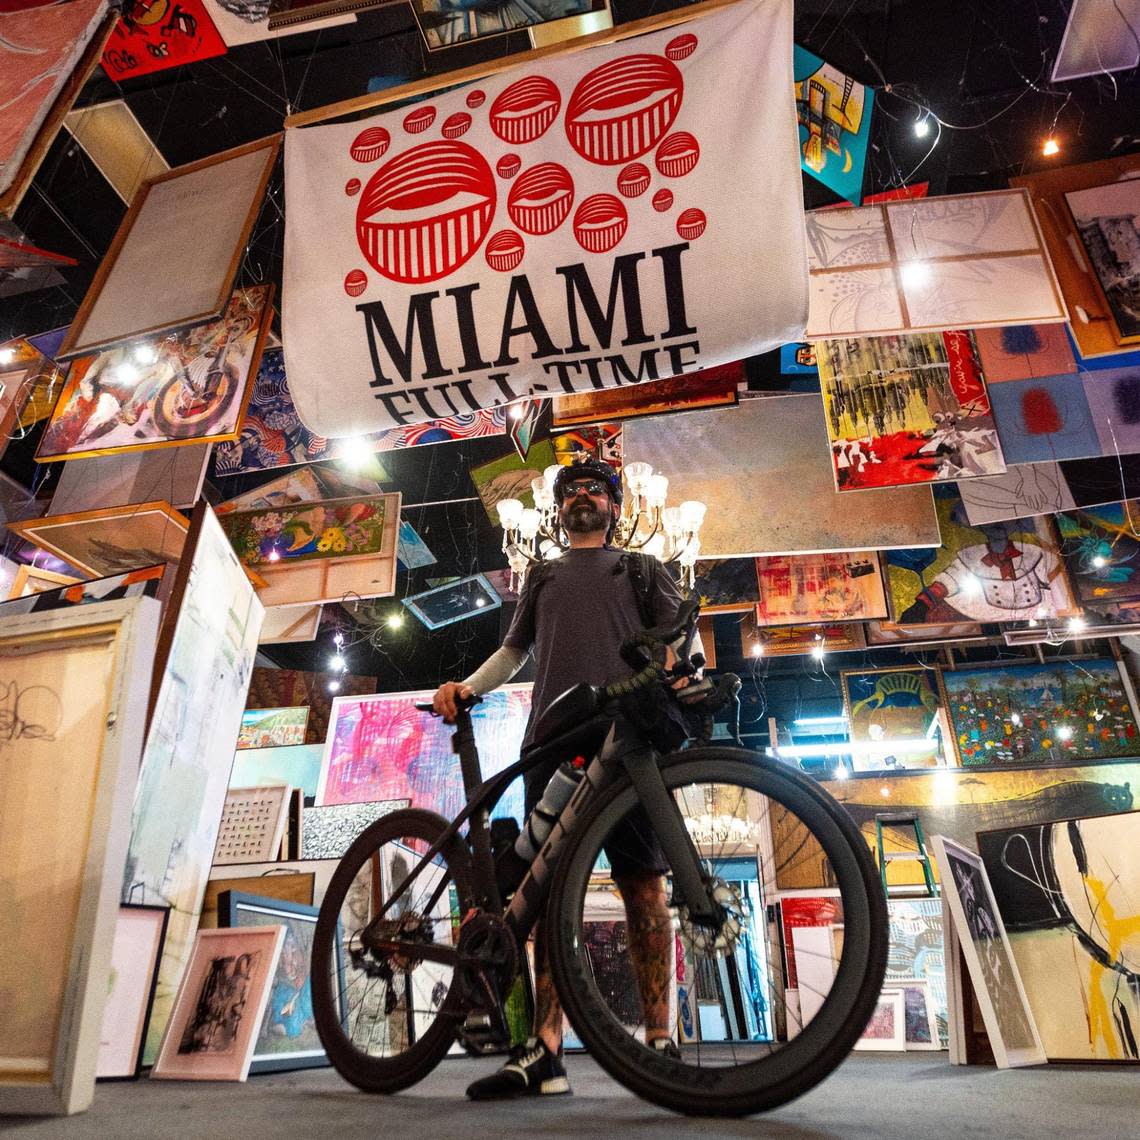 David Anasagasti, more popularly known as Ahol Sniffs Glue, strikes a pose alongside his bike and artwork for sale at Frame Art in Miami, Florida, on Friday, June 30, 2023. D.A. Varela/dvarela@miamiherald.com